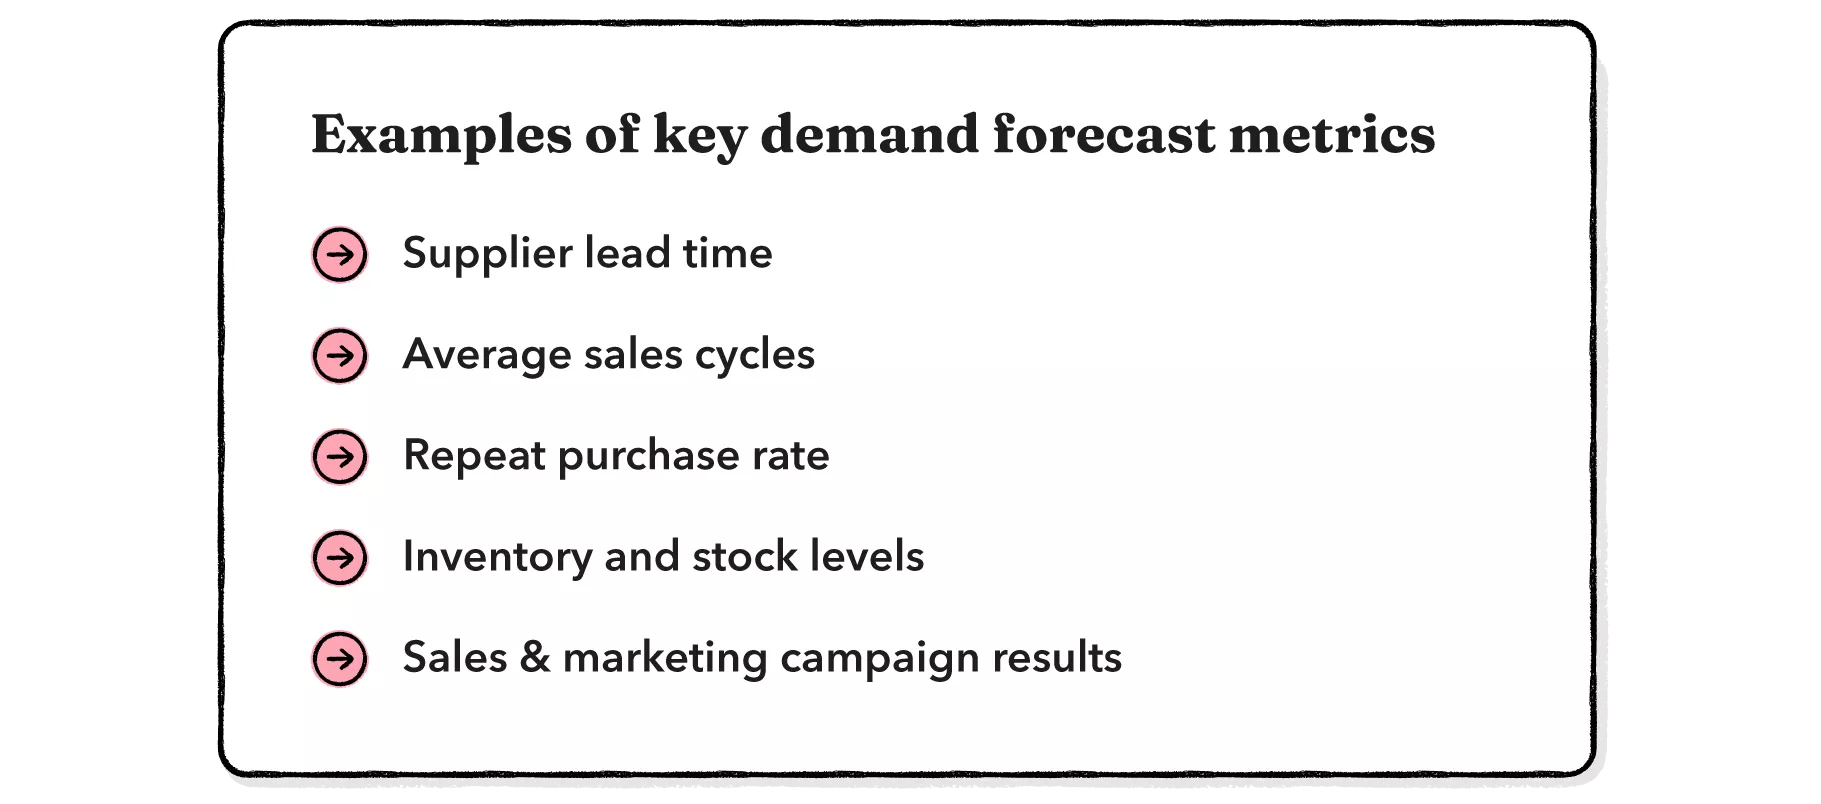 key metrics and types of demand forecasting examples